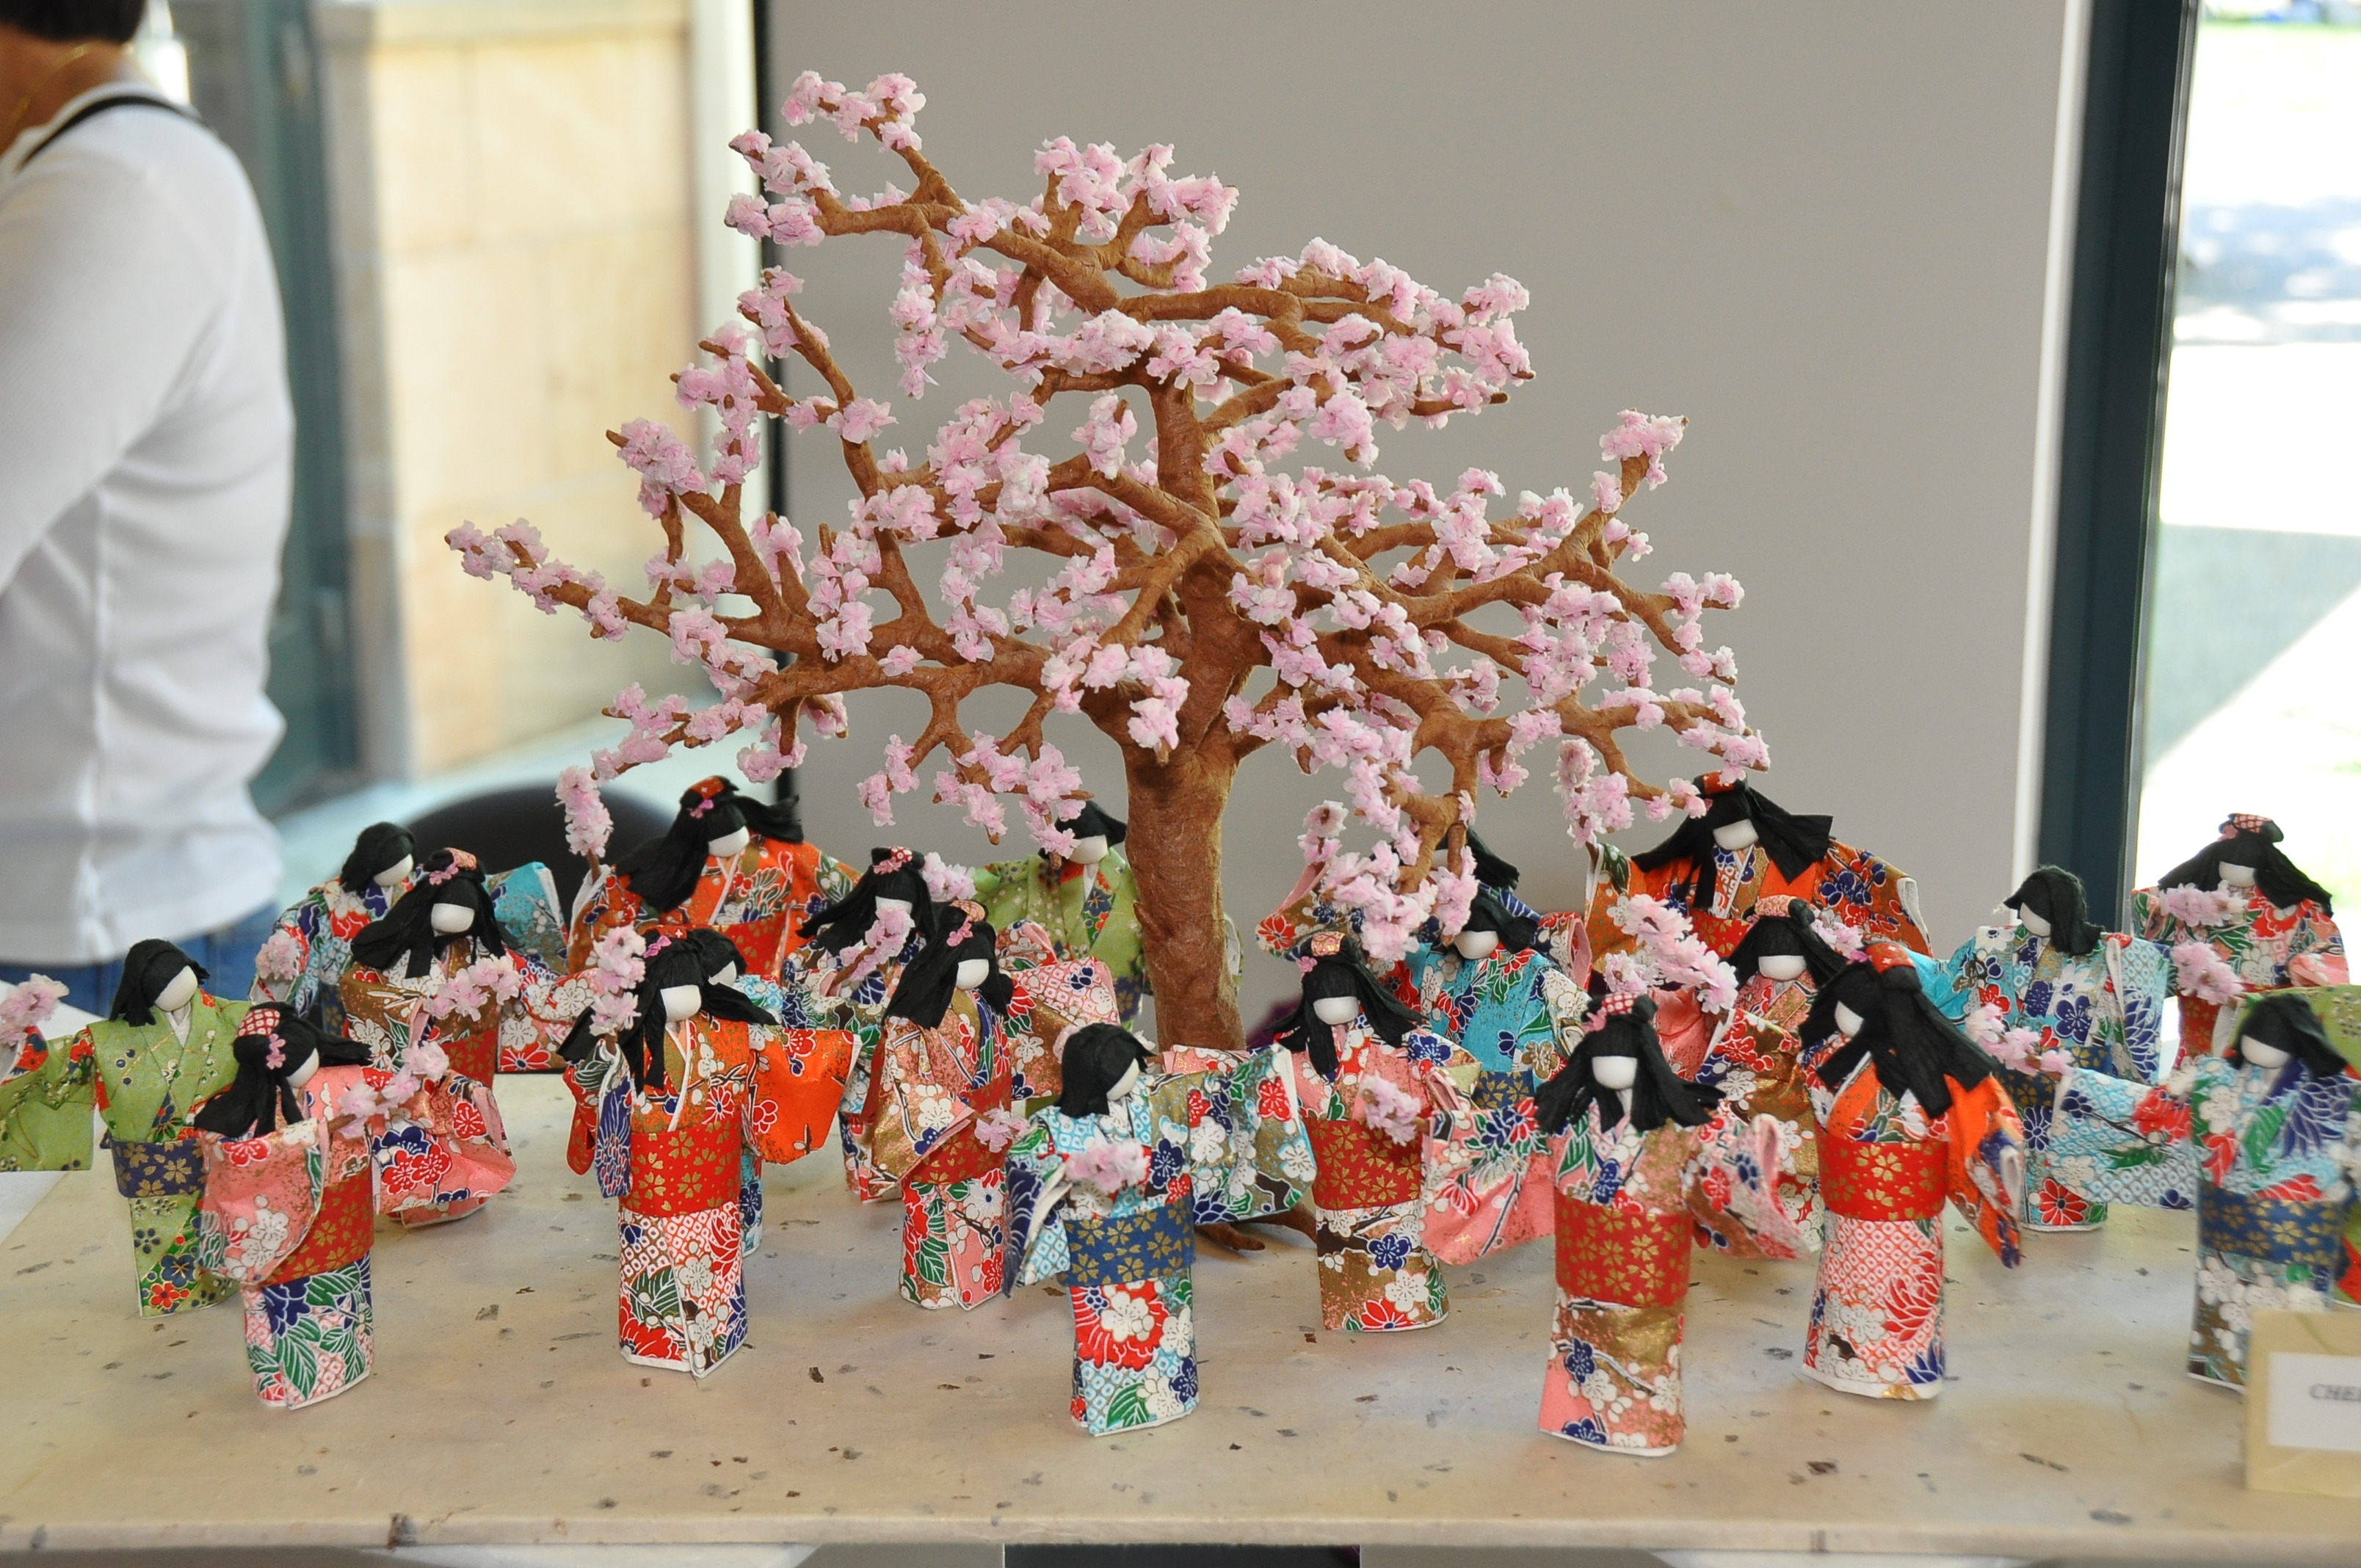 miniature dancing figures around a blossoming cherry tree